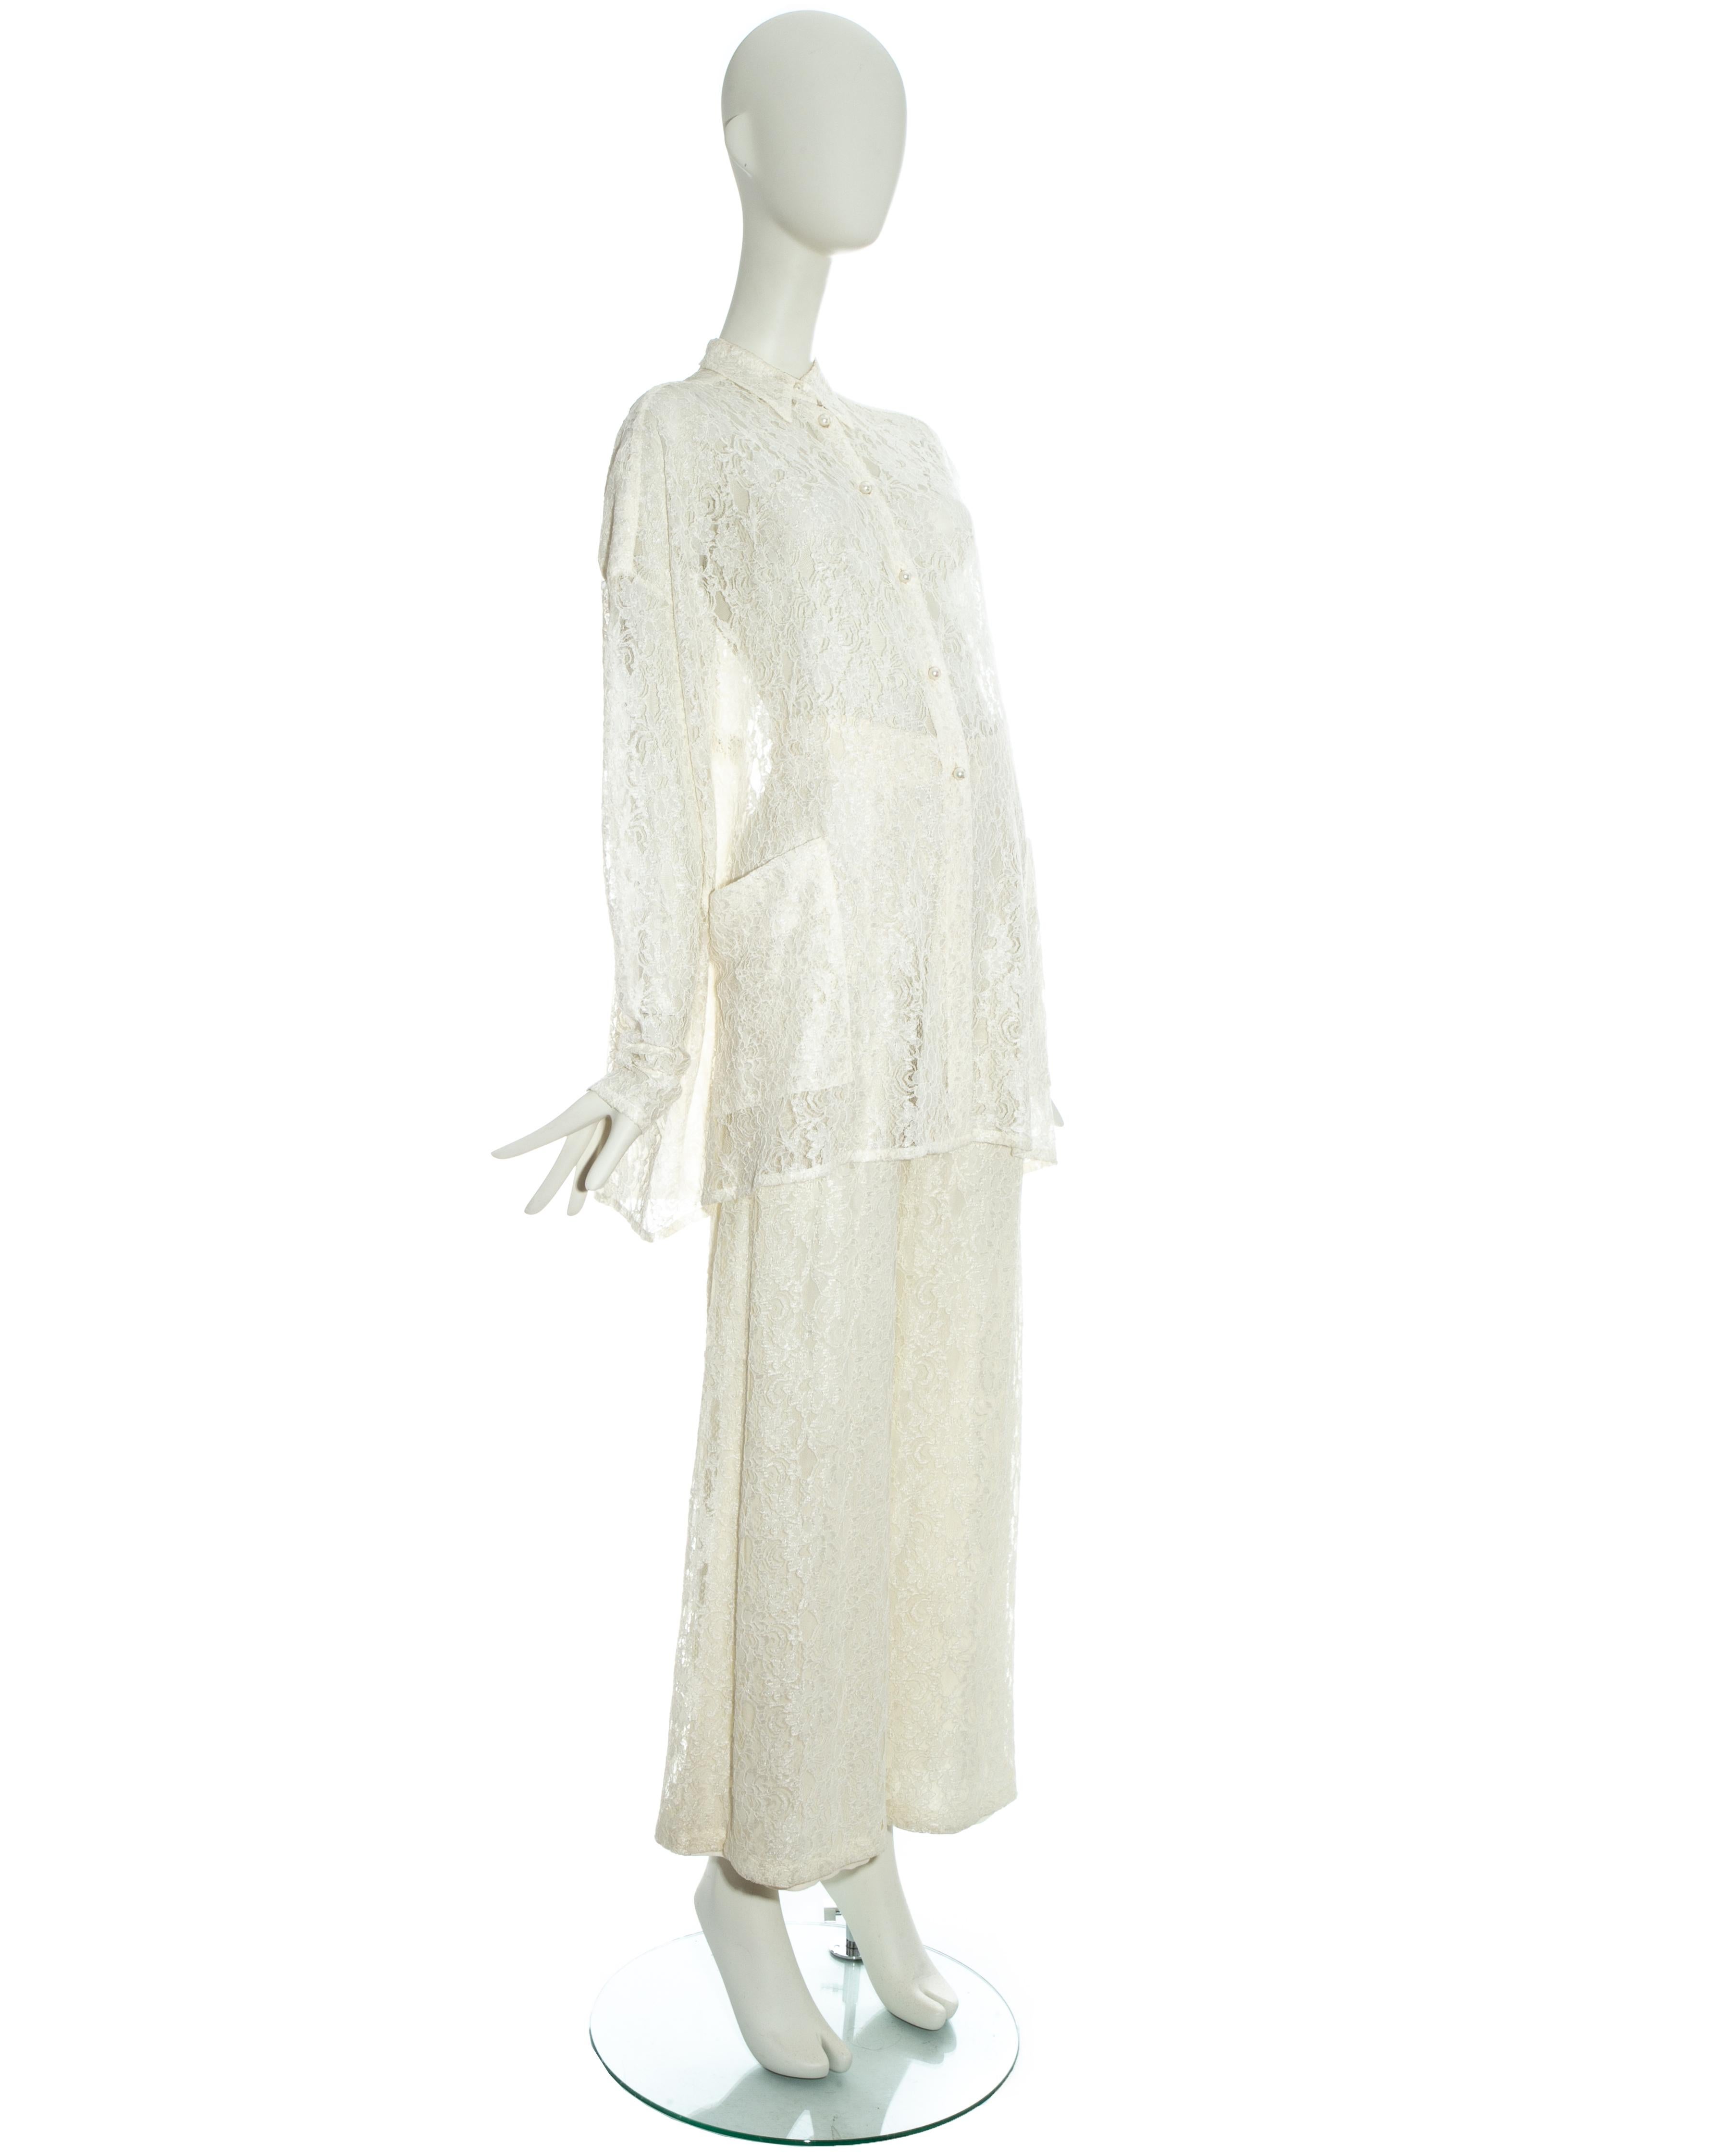 Dolce & Gabbana white lace flared pant suit. Loose cut blouse with front pockets and pearl buttons. High waisted flared pants with lining.

Spring-Summer 1993